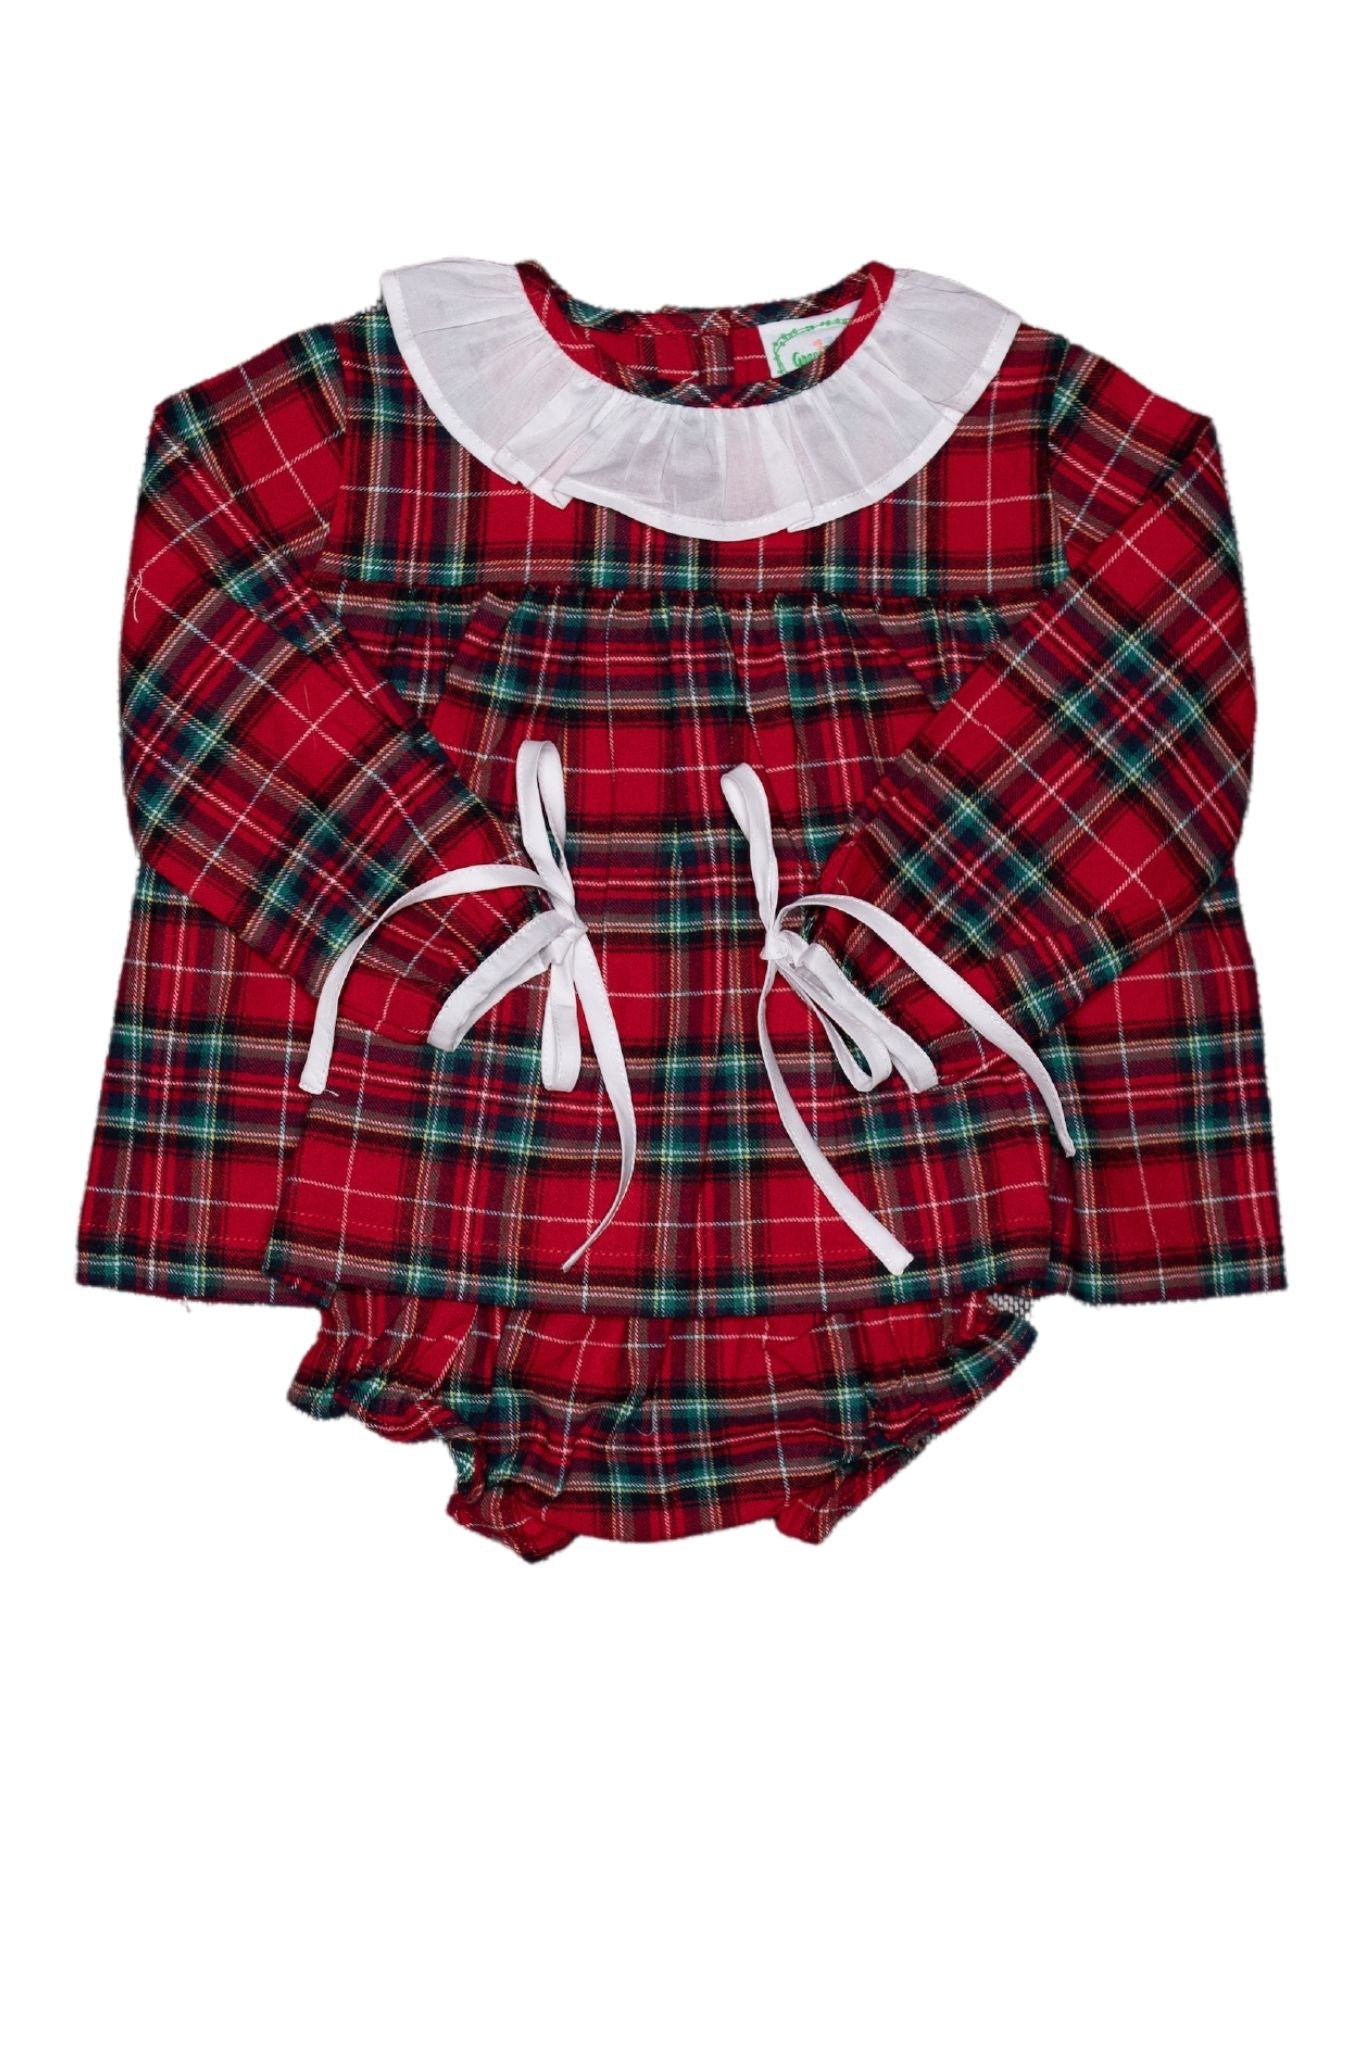 Red Plaid Clara Diaper Set with Ruffled Collar and White Bows